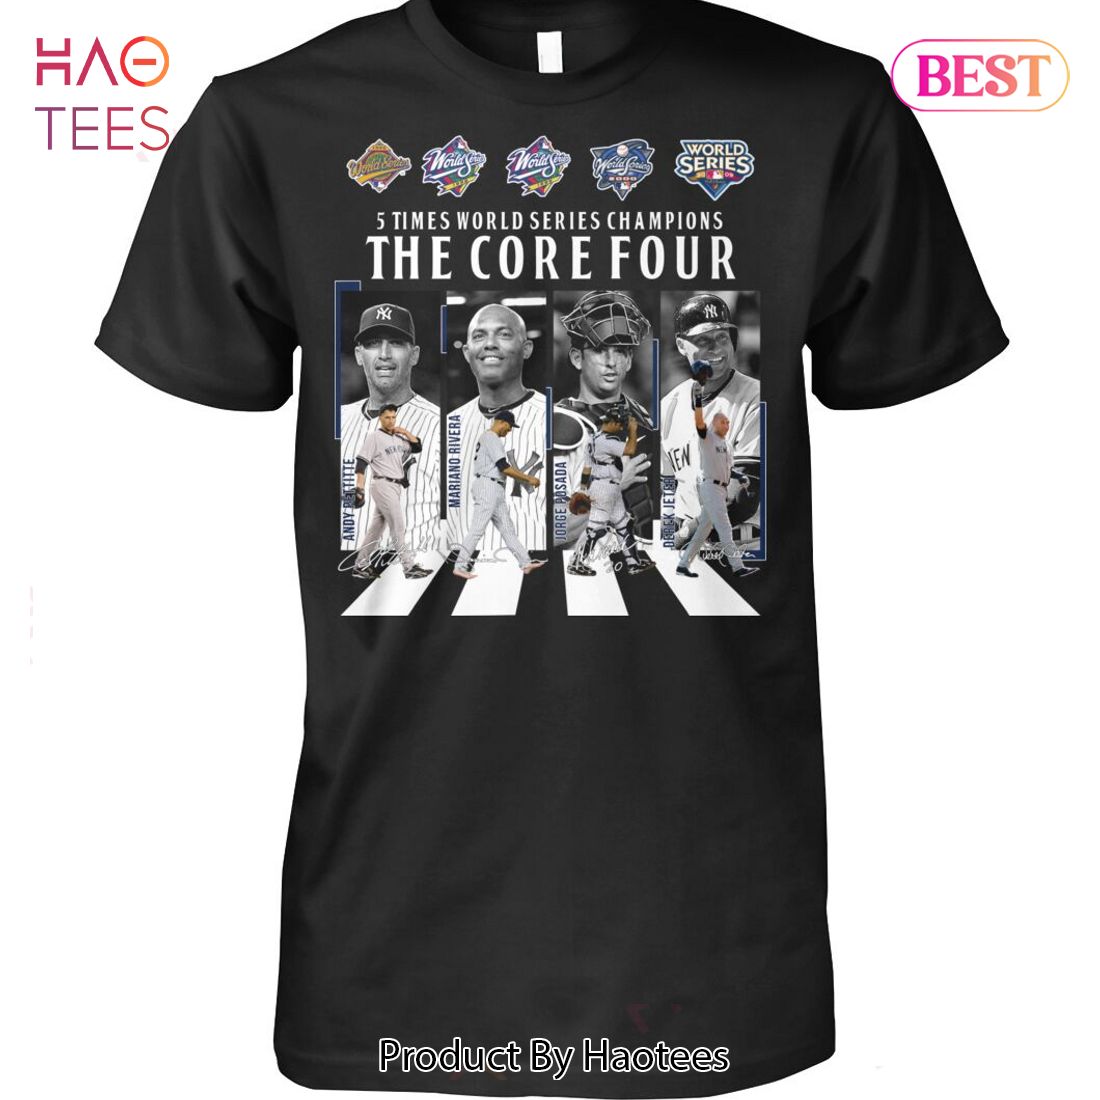 HOT 5 Times World Series Champions The Core Four New York Yankees